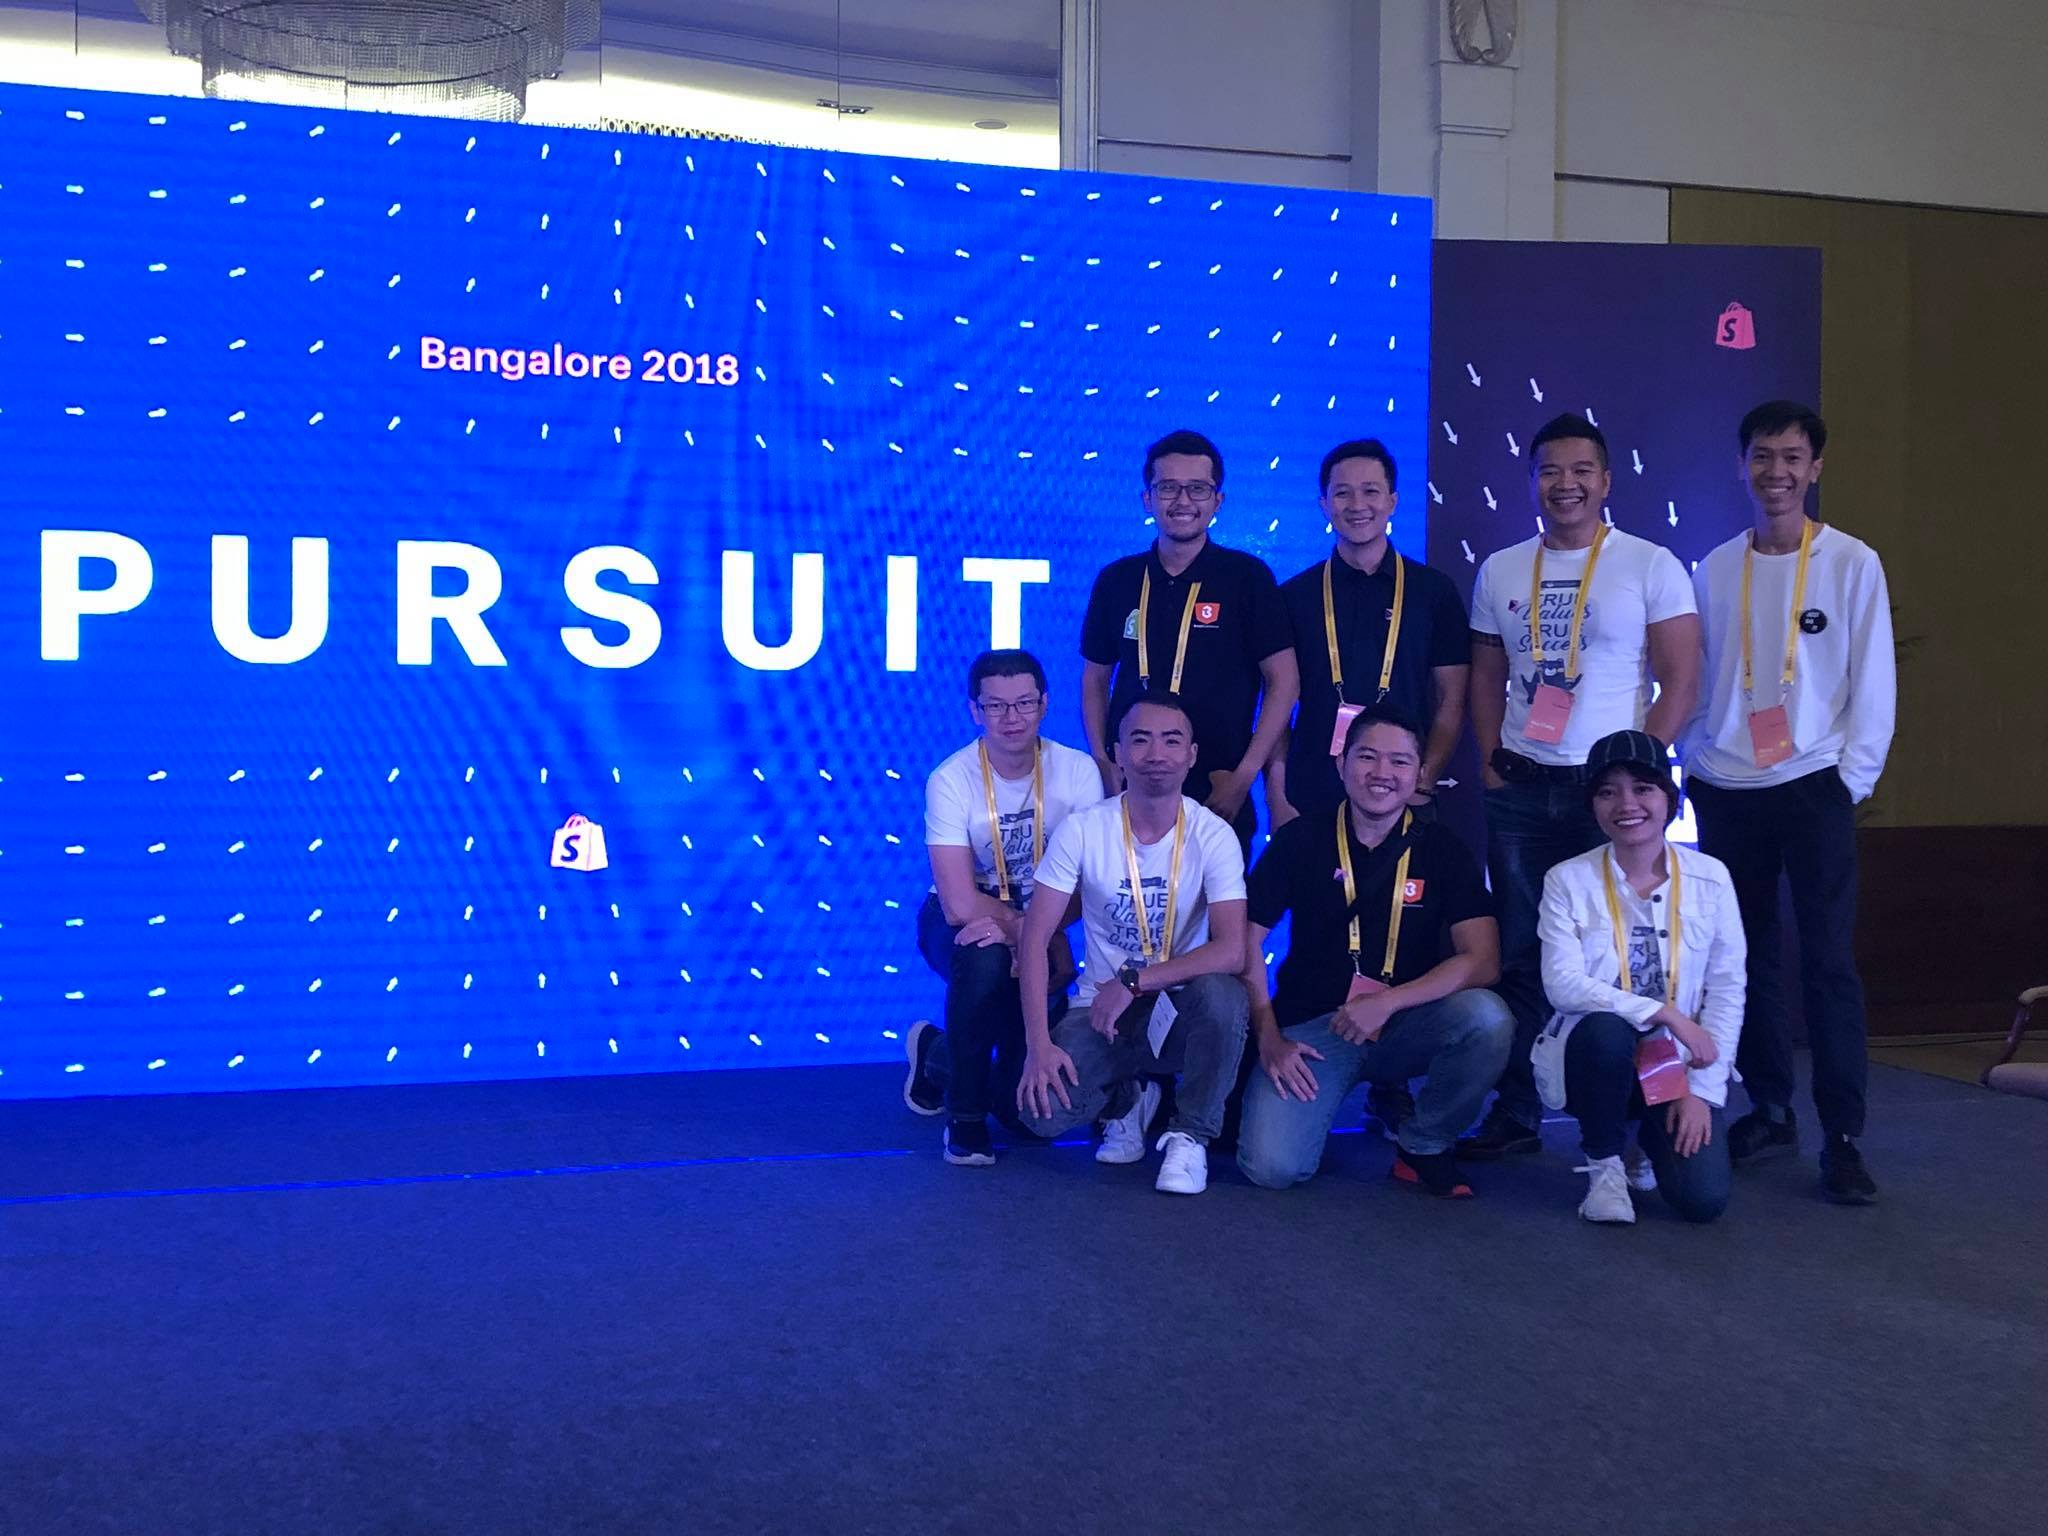 PageFly team tai Shopify meetup event - Pursuit 2018